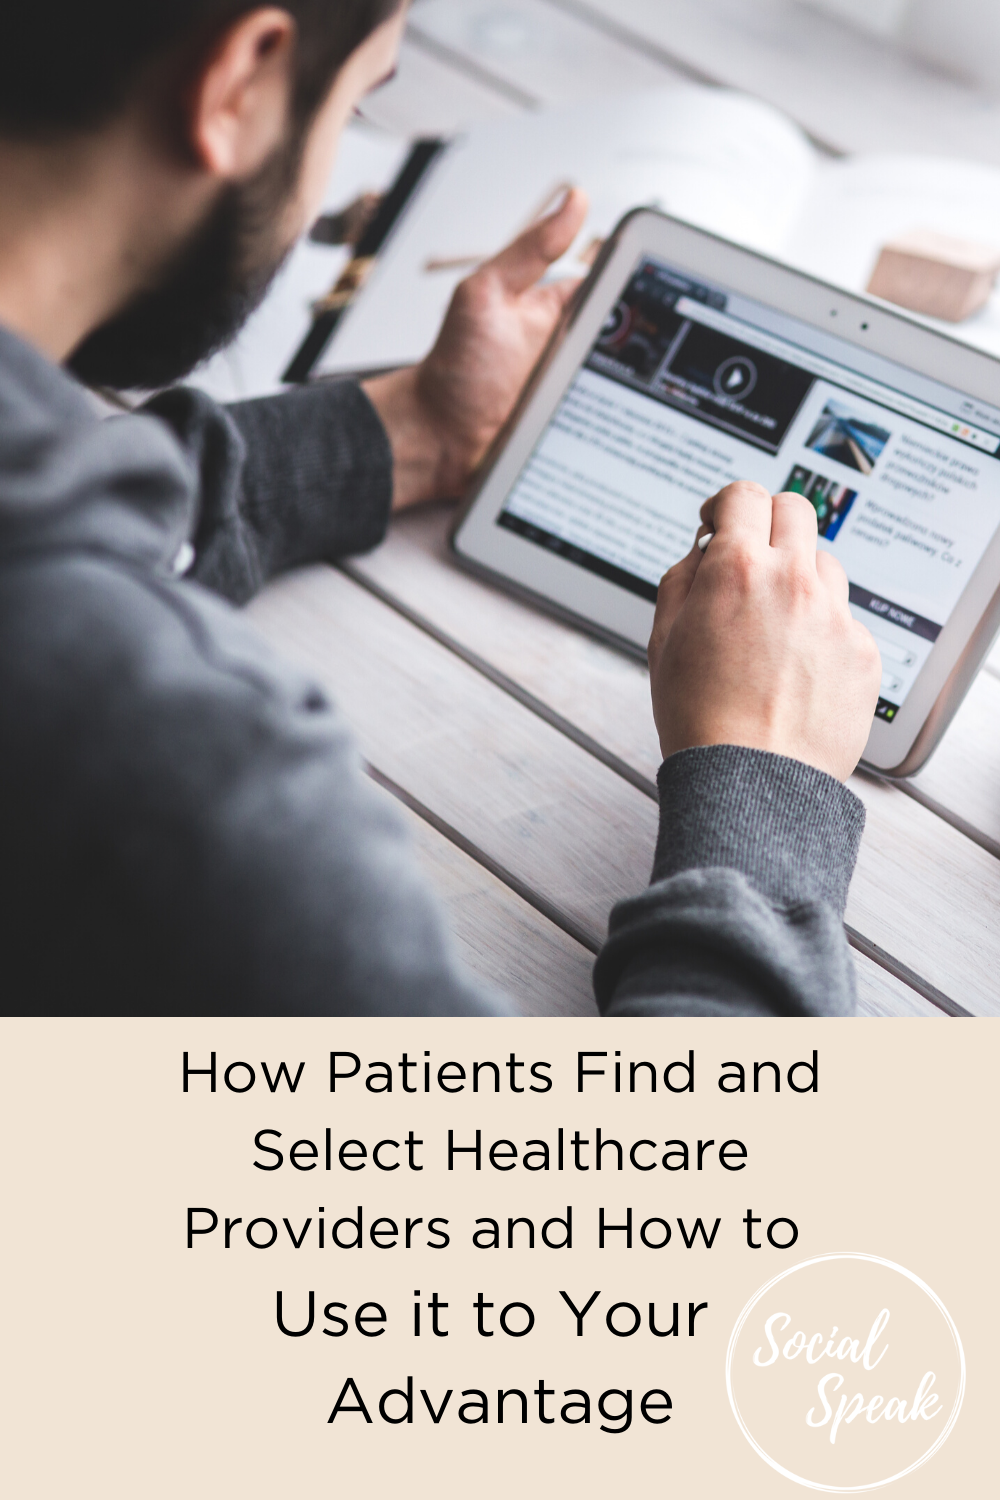 How Patients Find and Select Healthcare Providers and How to Use it to Your Advantage